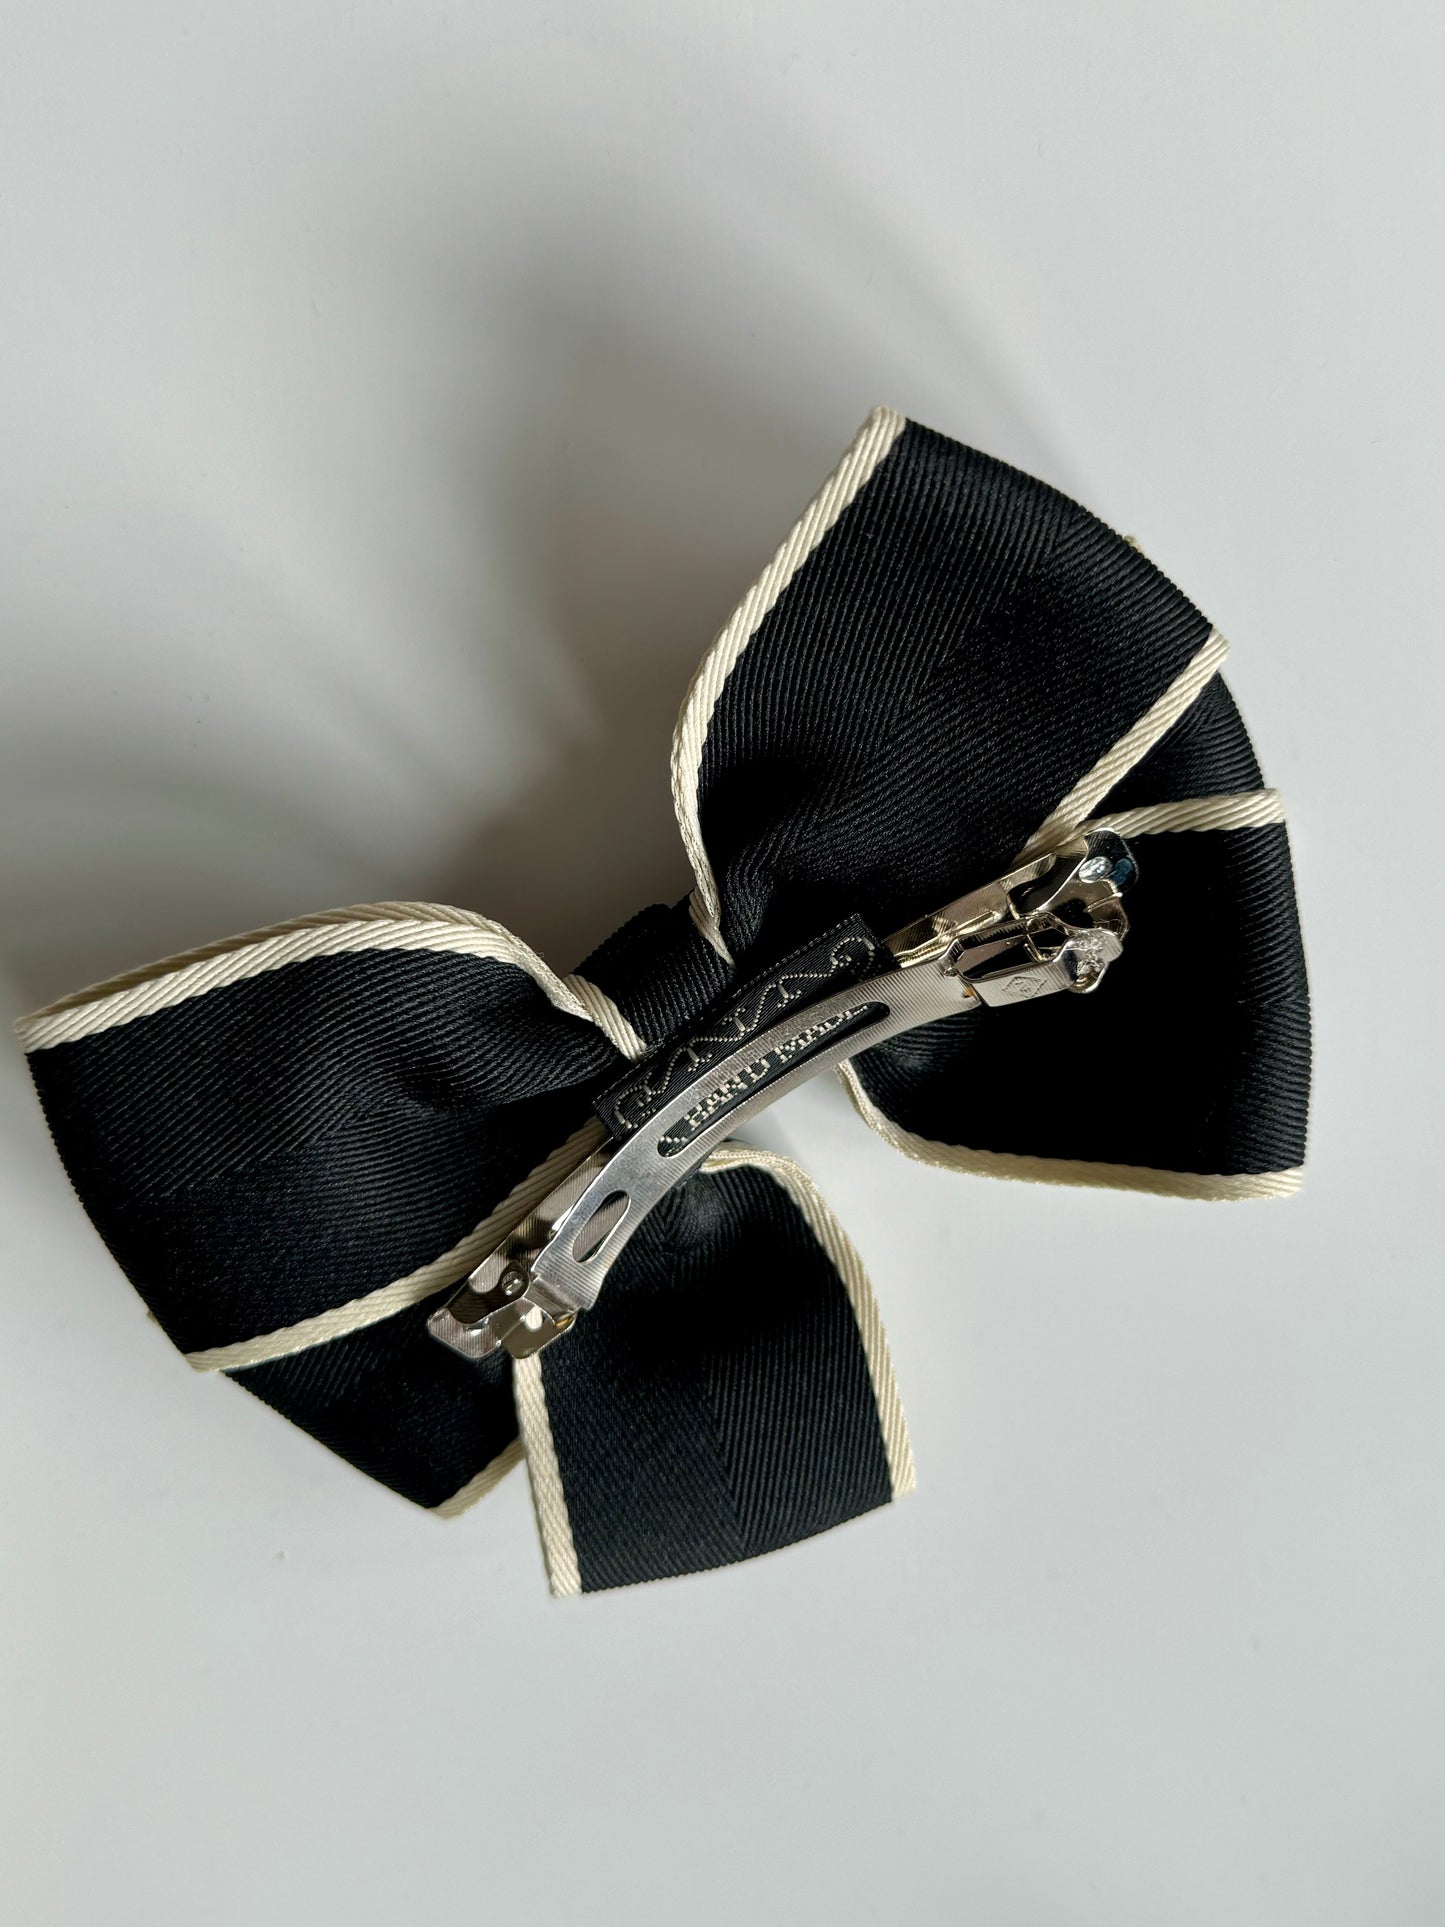 Chic Noir: Bowknot French Barrette Sweet Hair Clip in Black